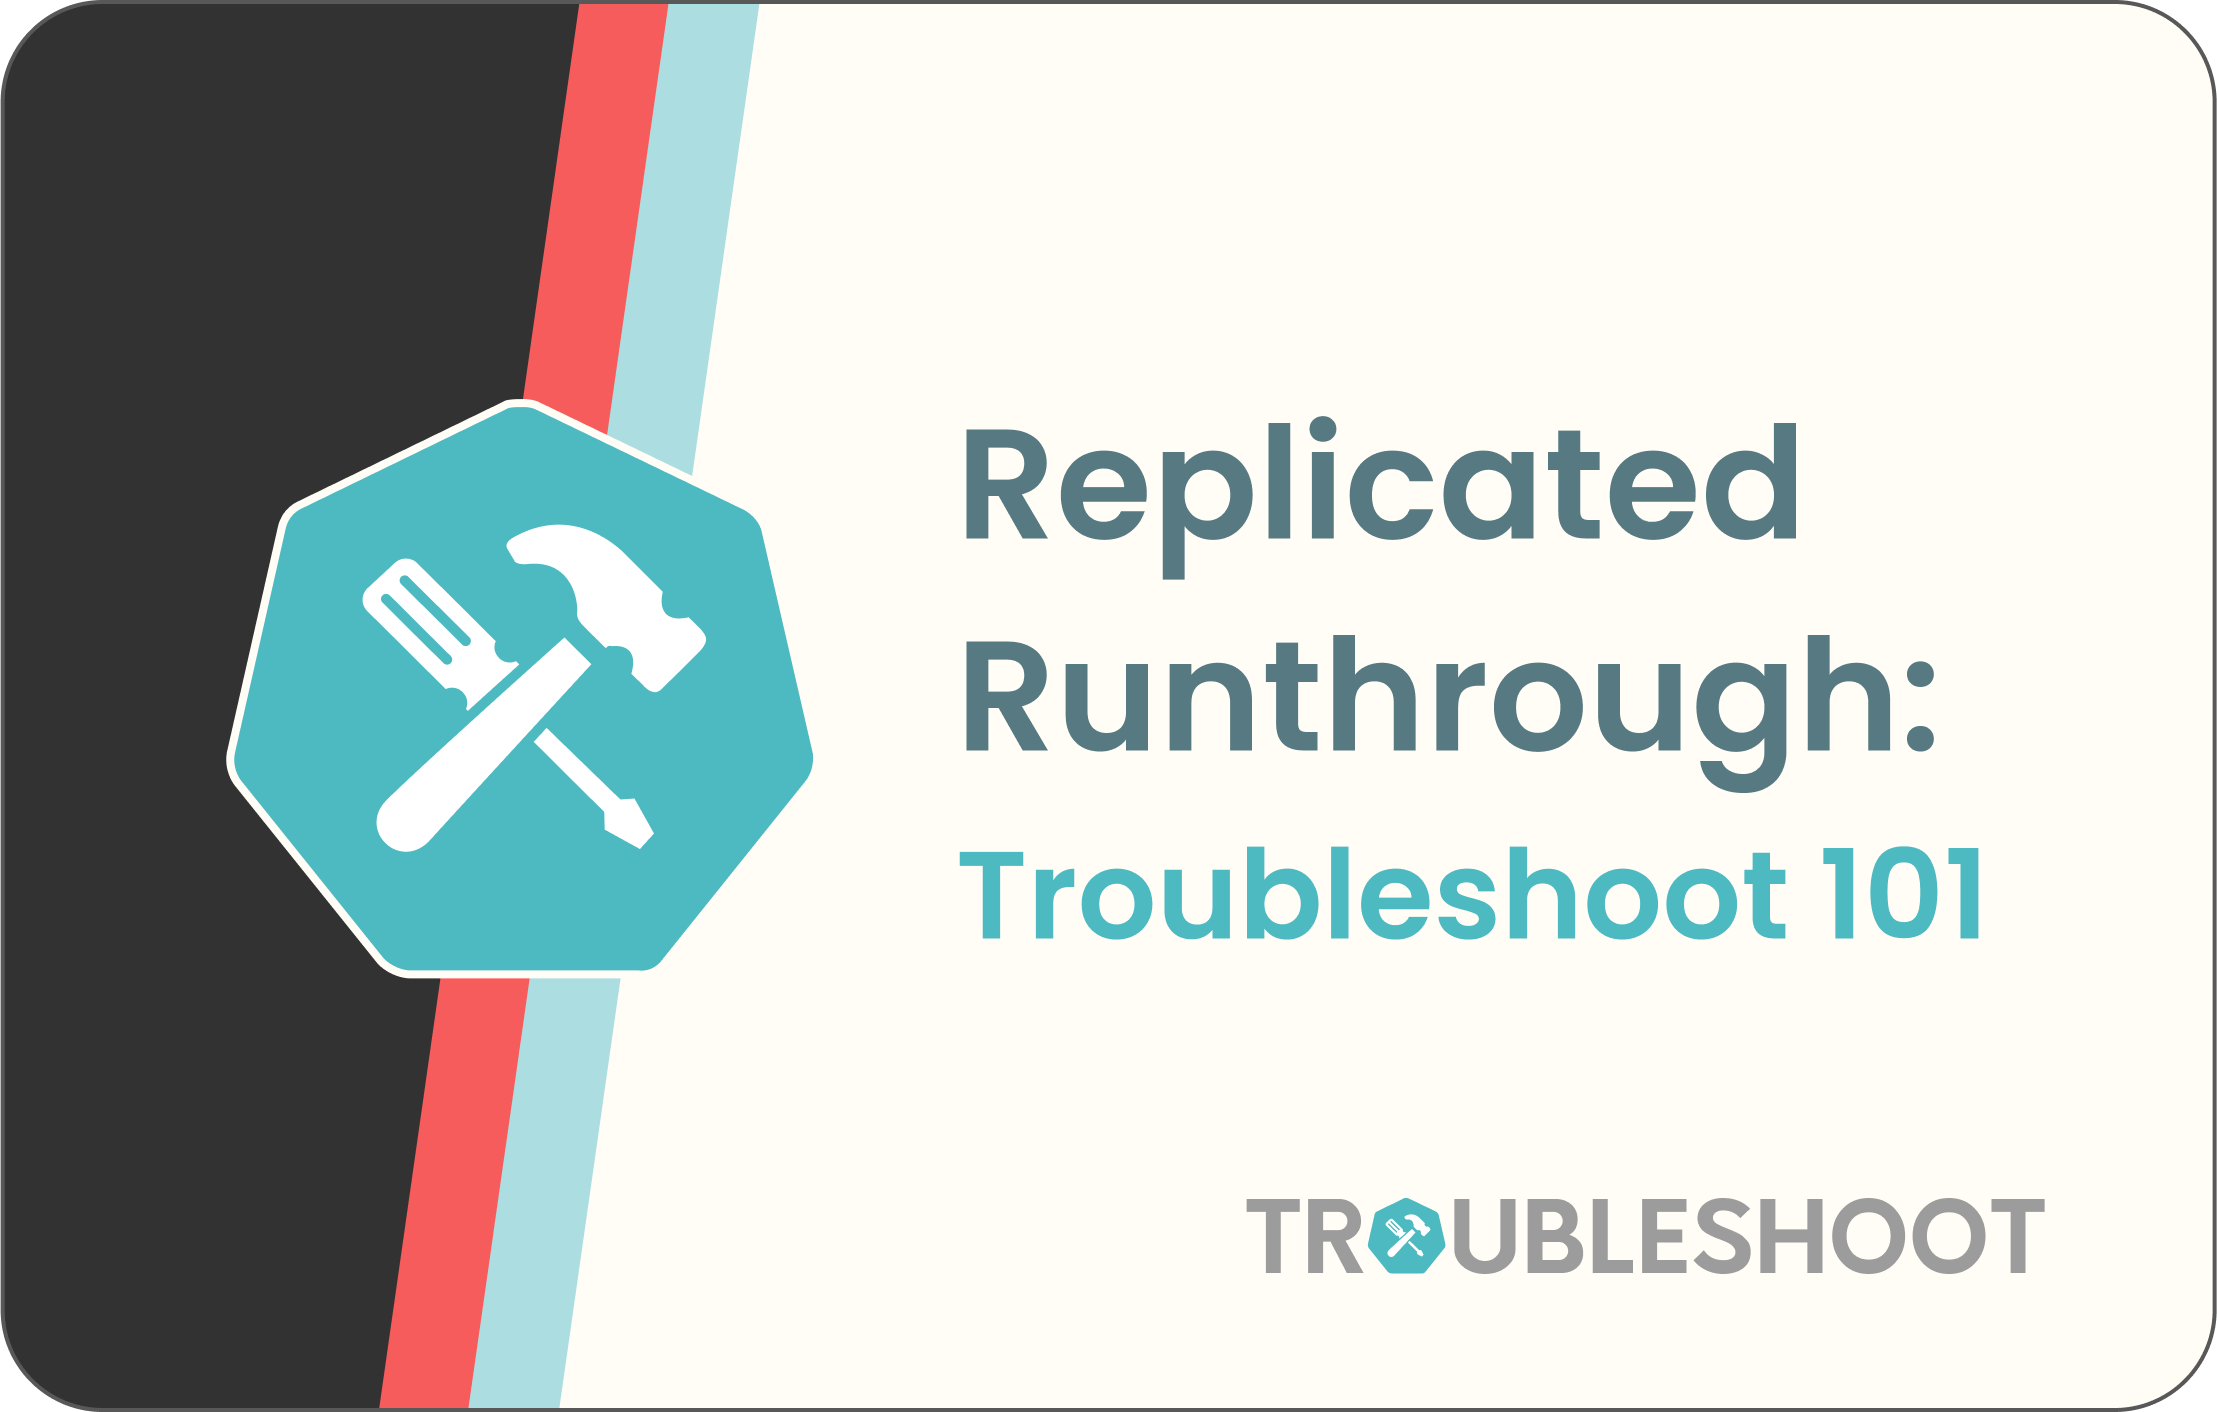 Replicated Troubleshoot